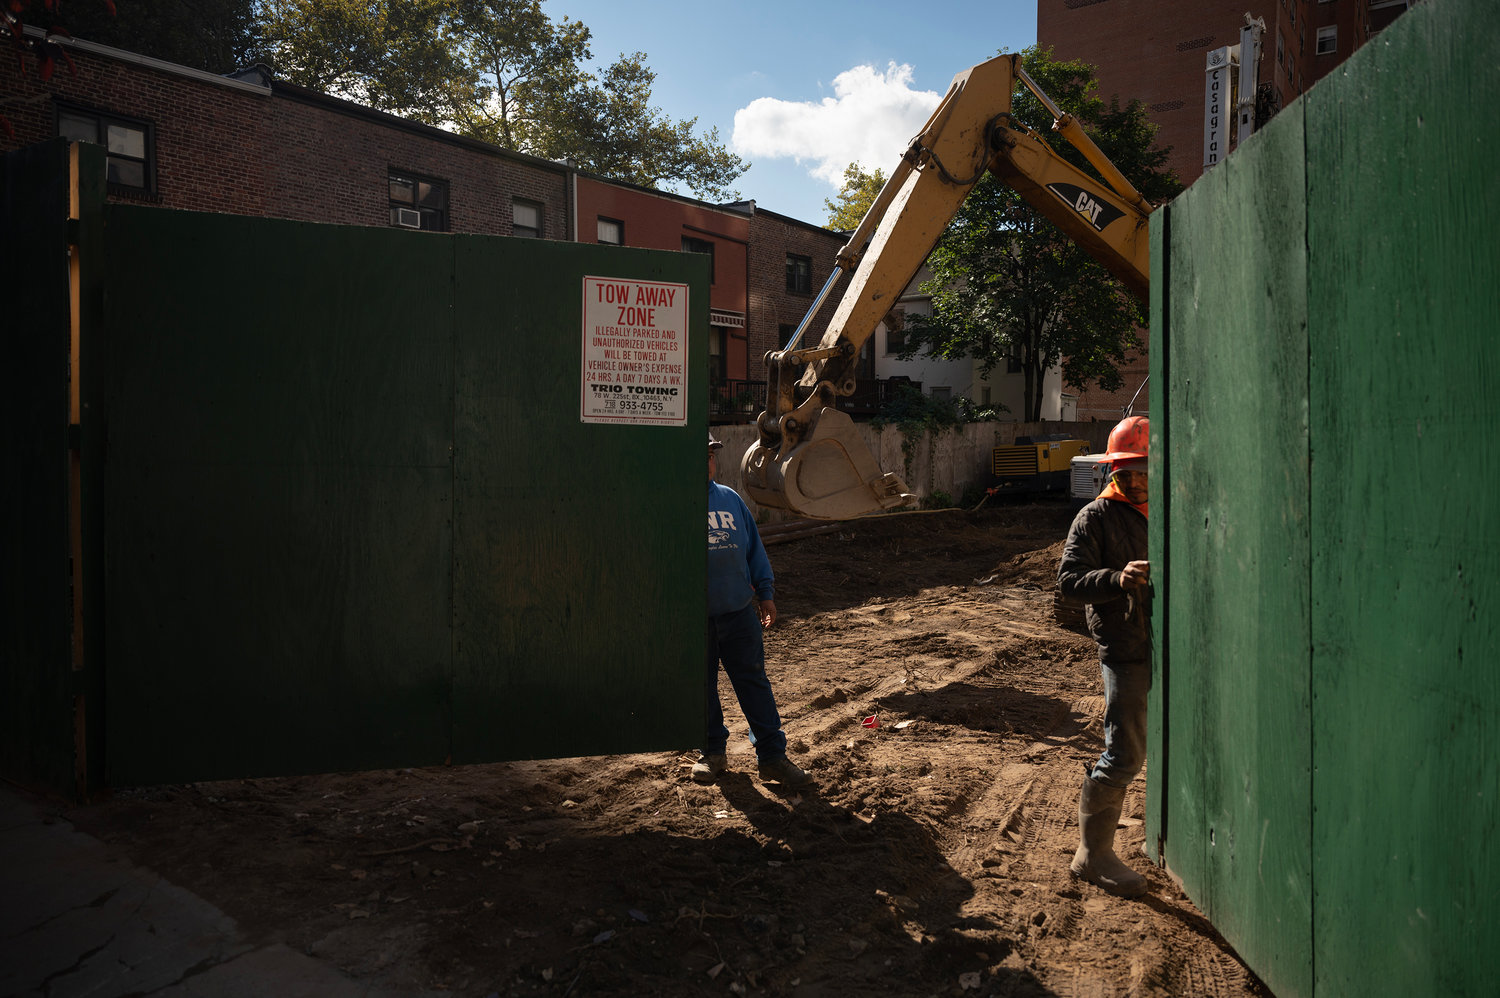 Workers at the site of the proposed International Leadership Charter middle school close the gate as they begin work.